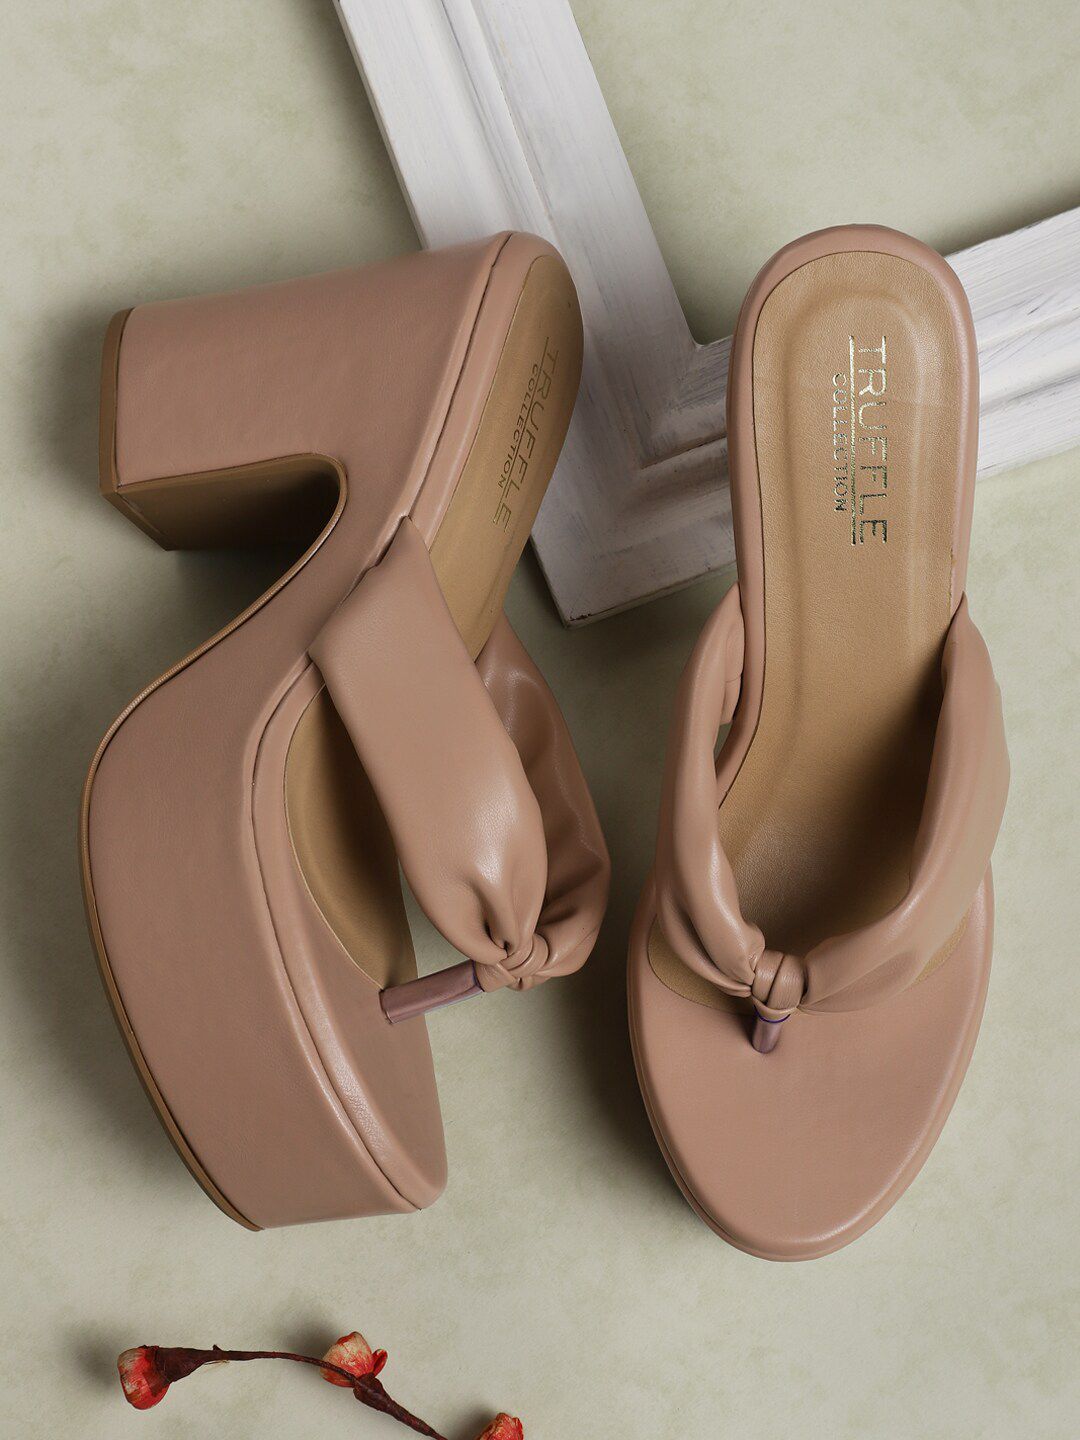 Truffle Collection Nude-Coloured PU Block Sandals Price in India